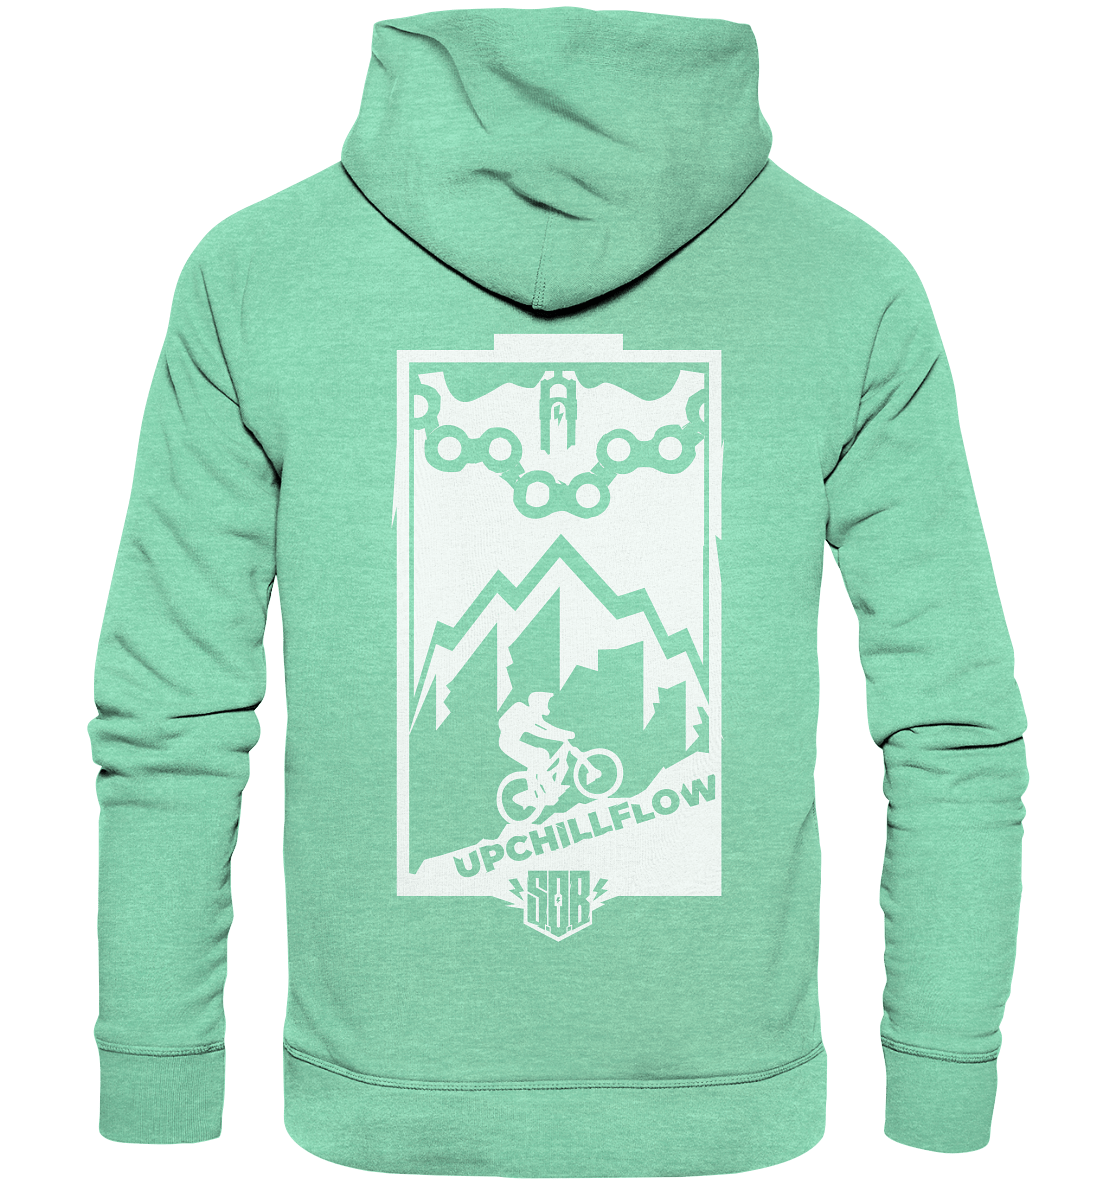 Sons of Battery® - E-MTB Brand & Community Hoodies Mid Heather Green / XS Sons of Battery - Upchillflow - Organic Hoodie E-Bike-Community